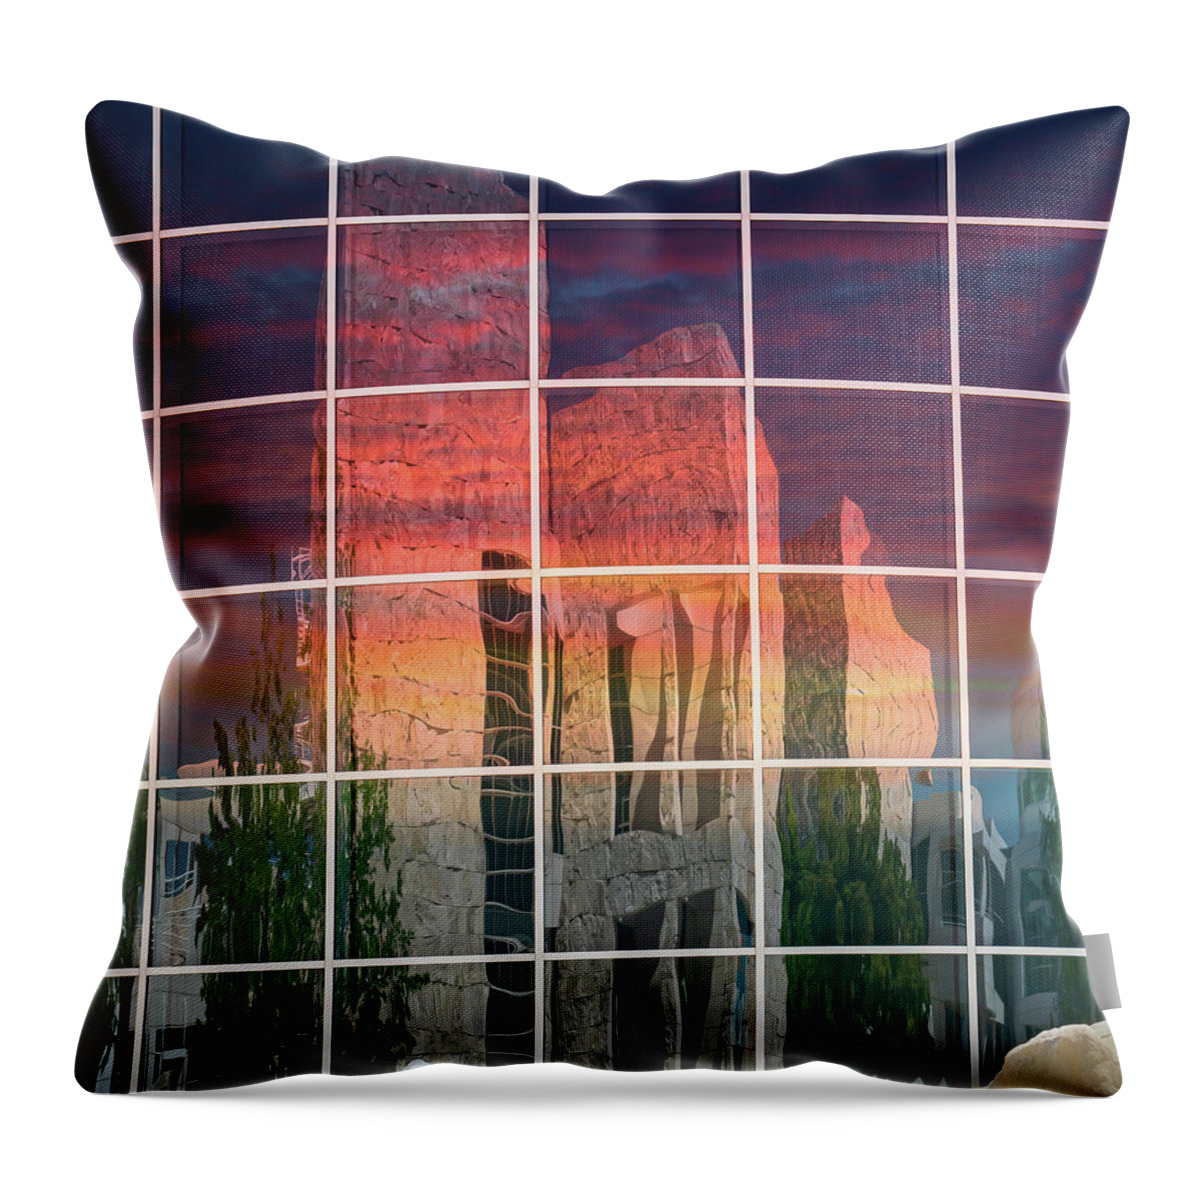 Reflection Throw Pillow featuring the photograph Rainbow Reflection by Sylvia Goldkranz